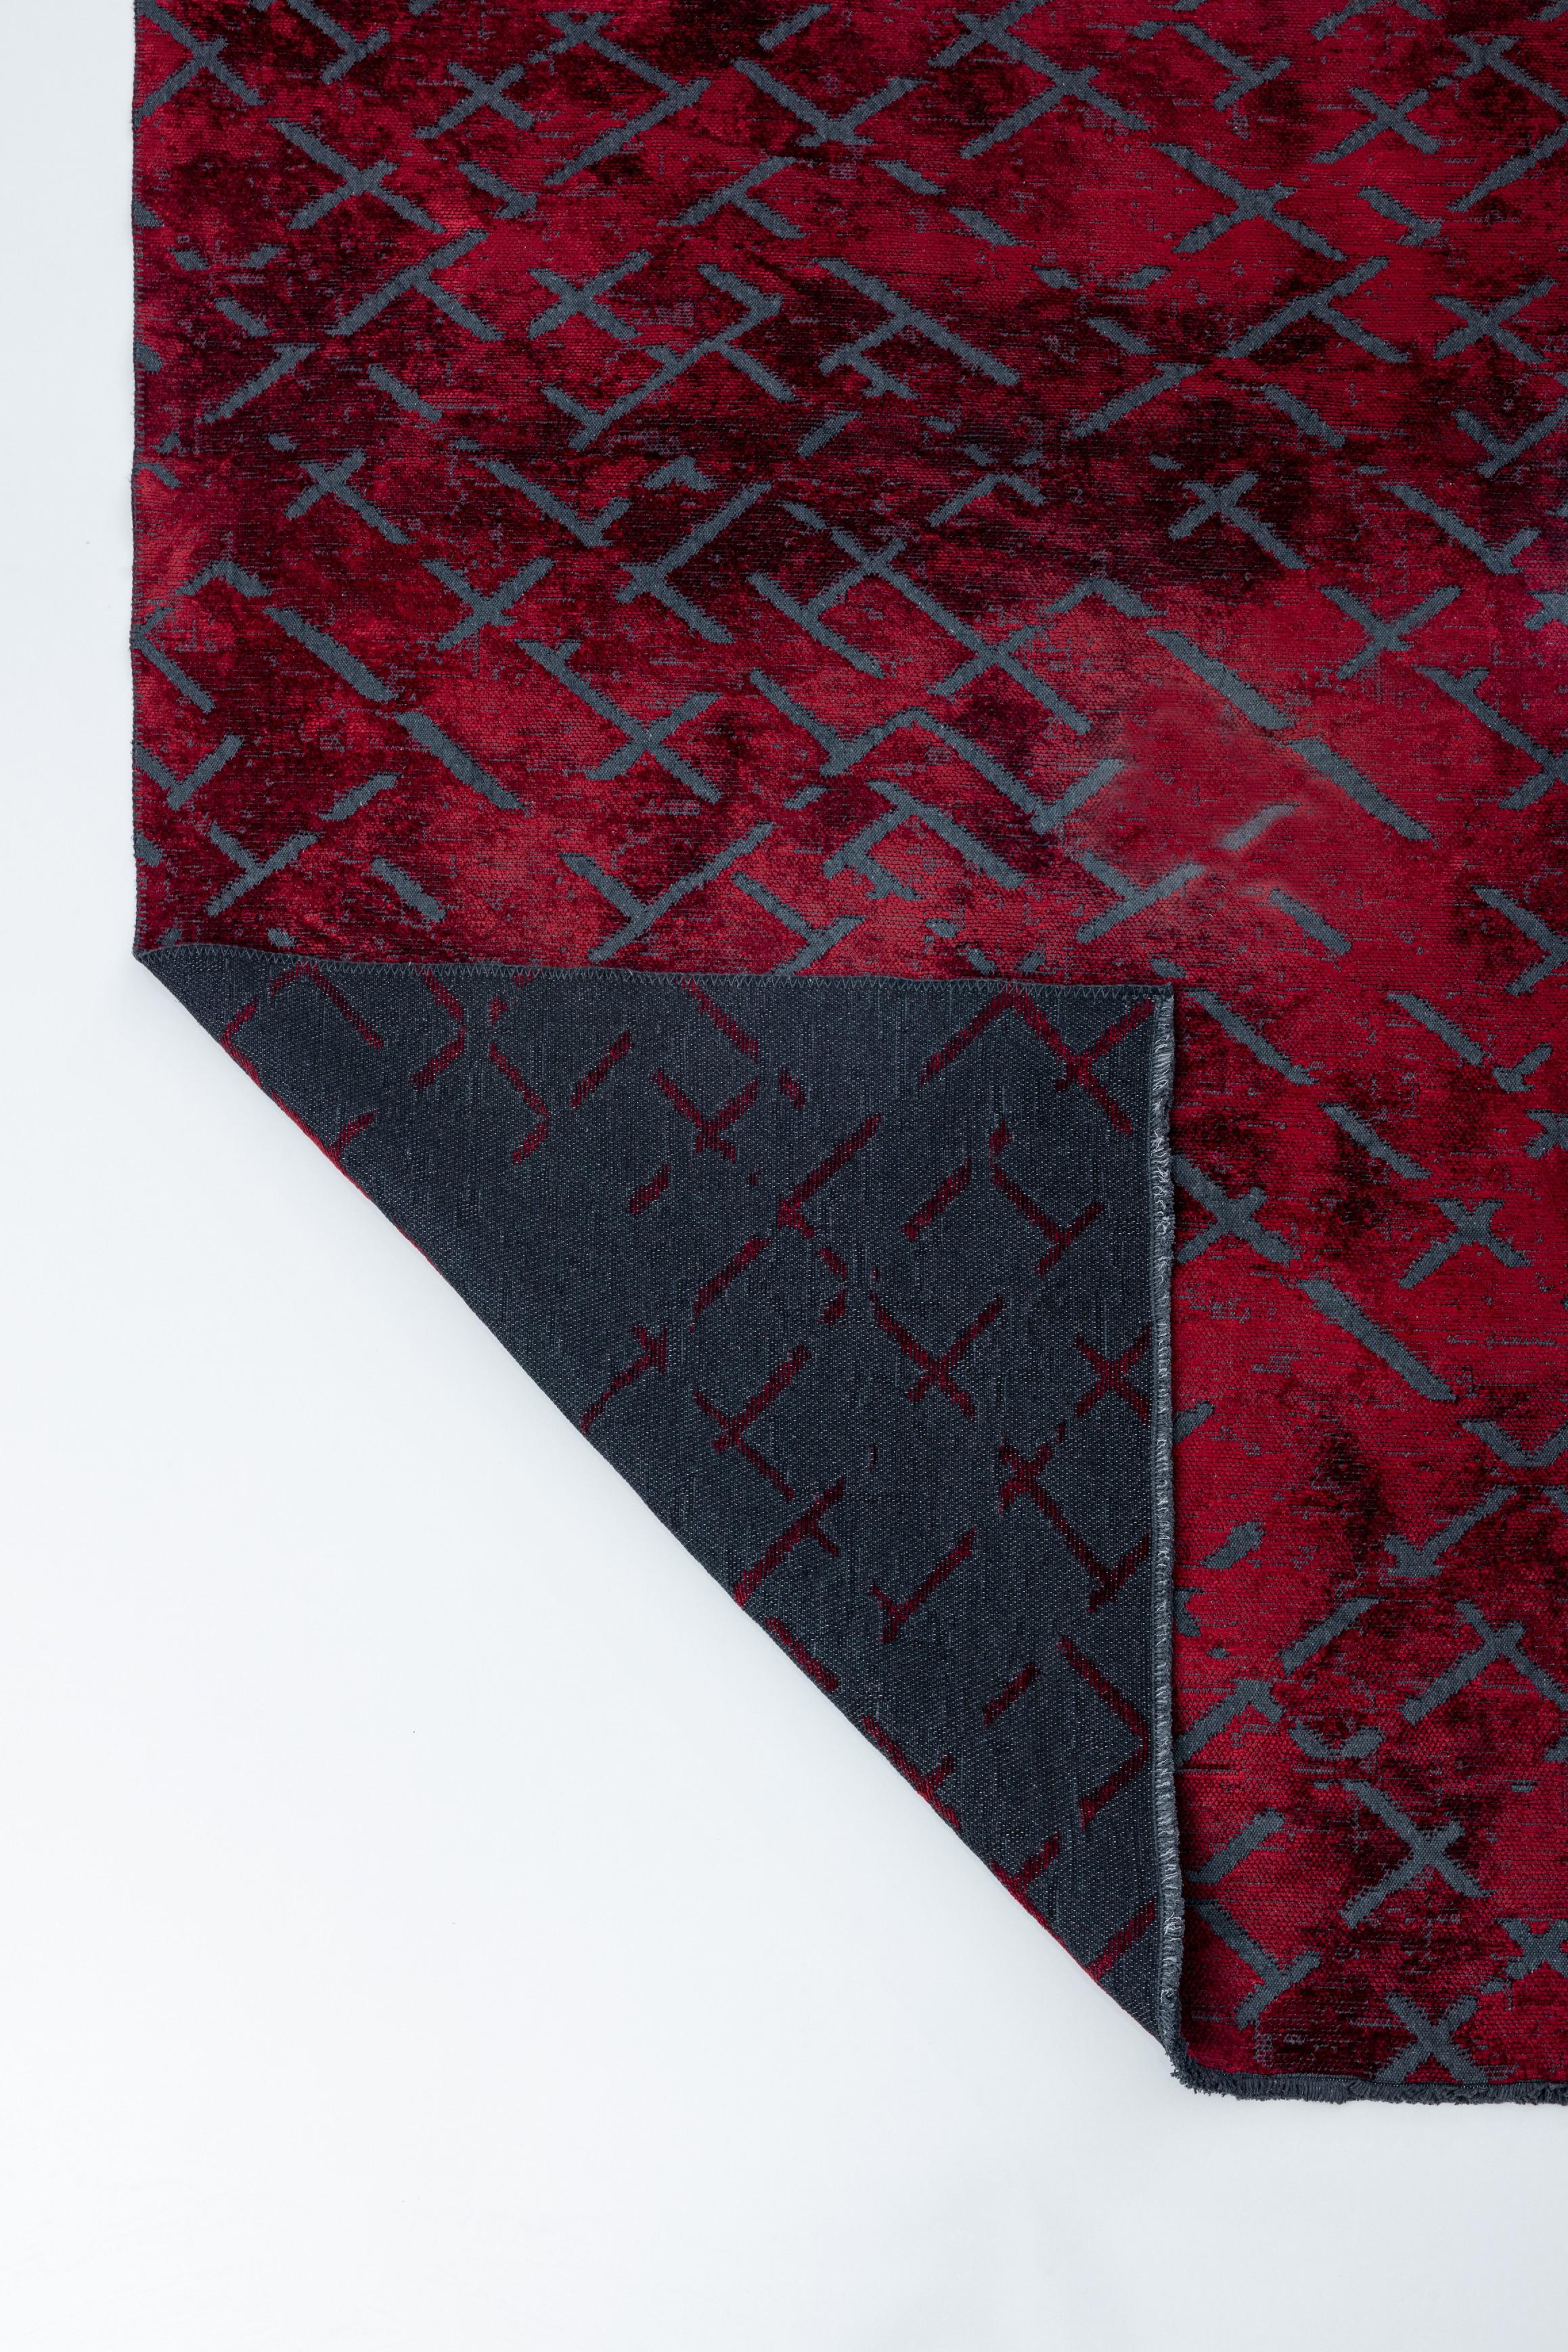 For Sale:  (Red) Modern  Abstract Luxury Hand-Finished Area Rug 3